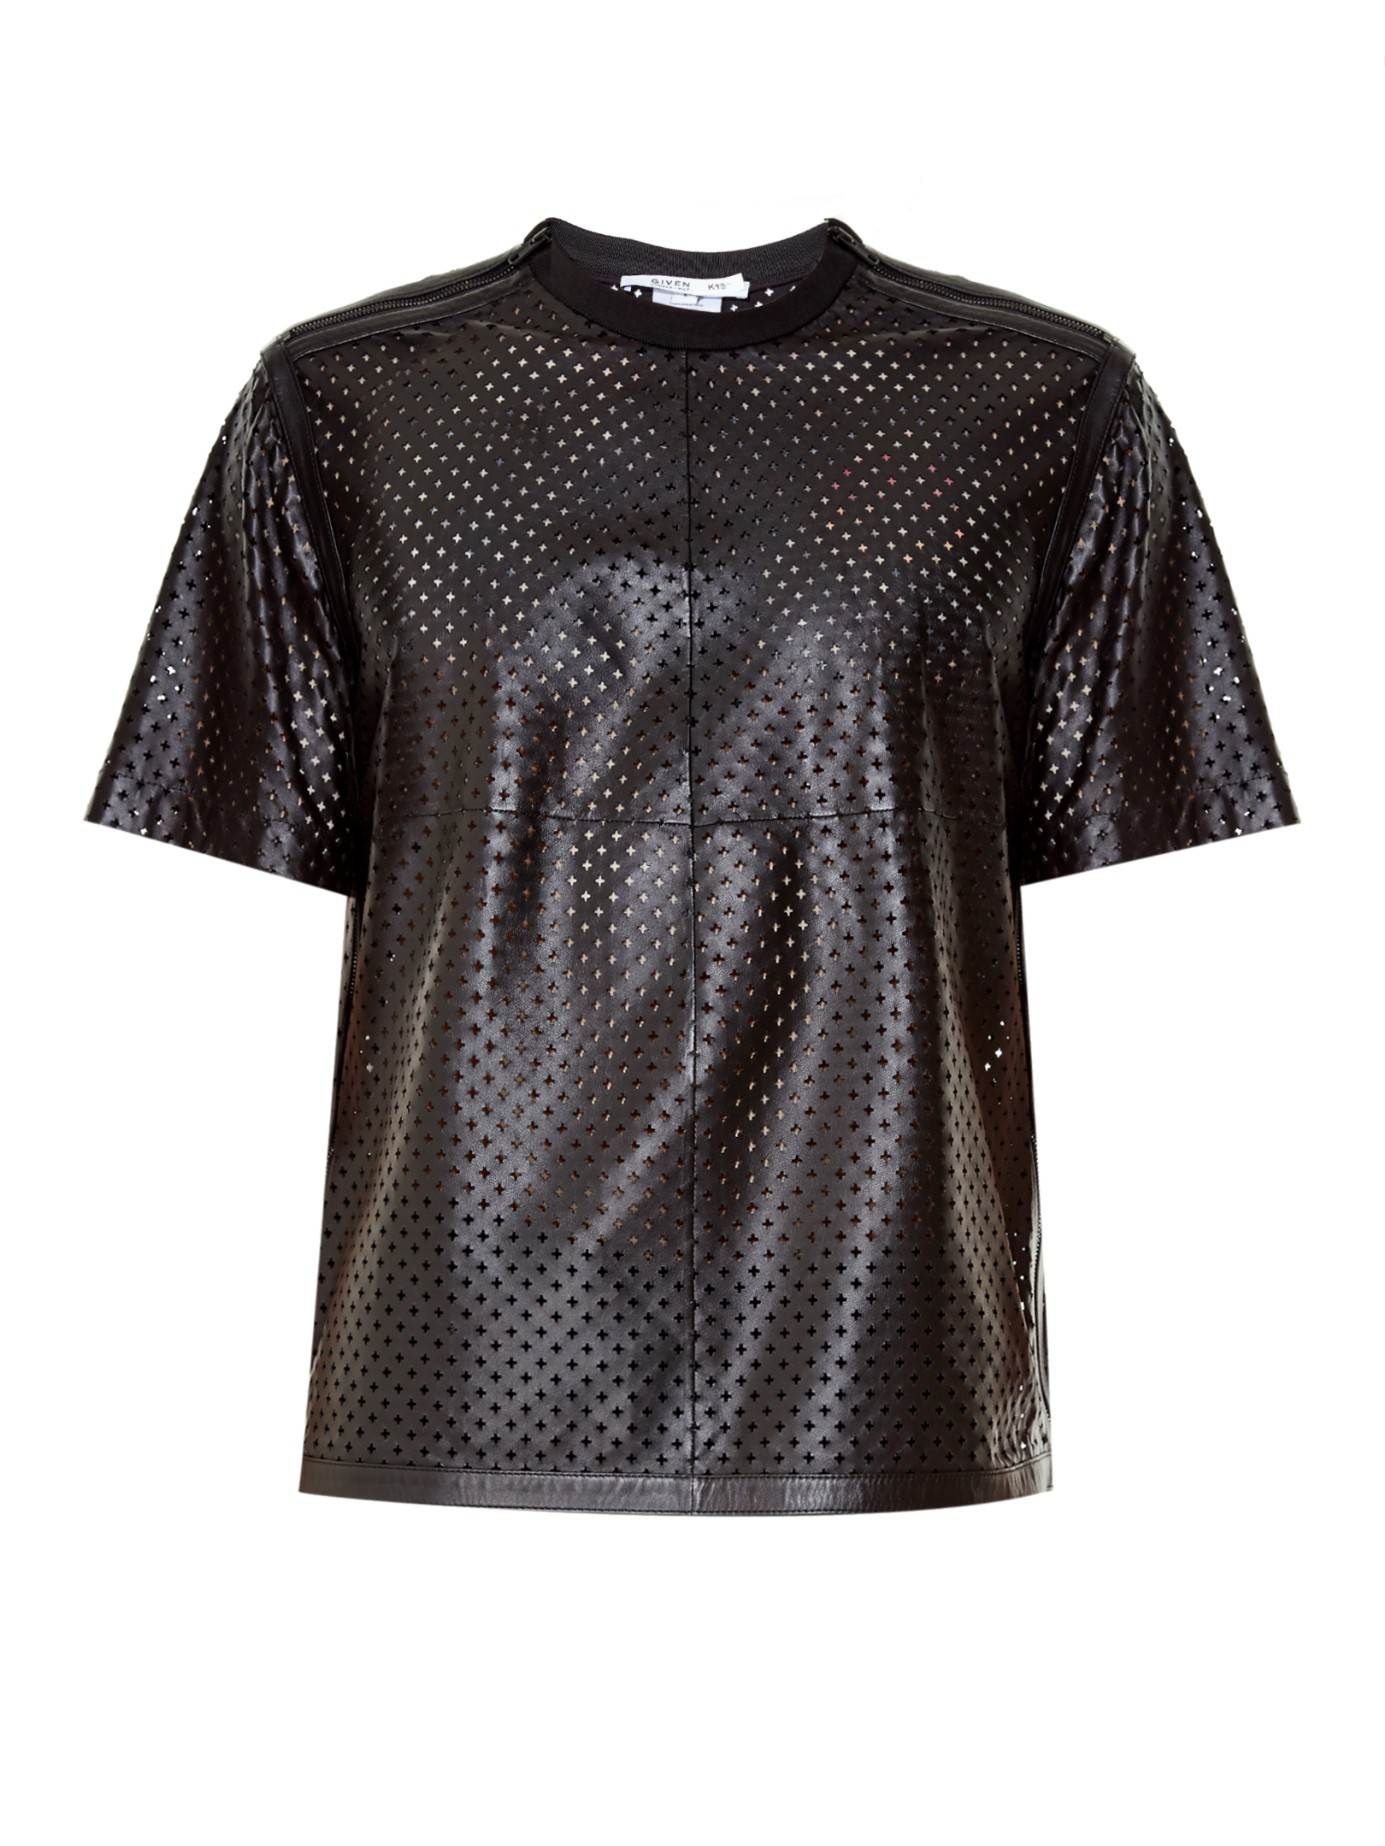 Lyst - Givenchy Laser-cut Leather T-shirt in Black for Men